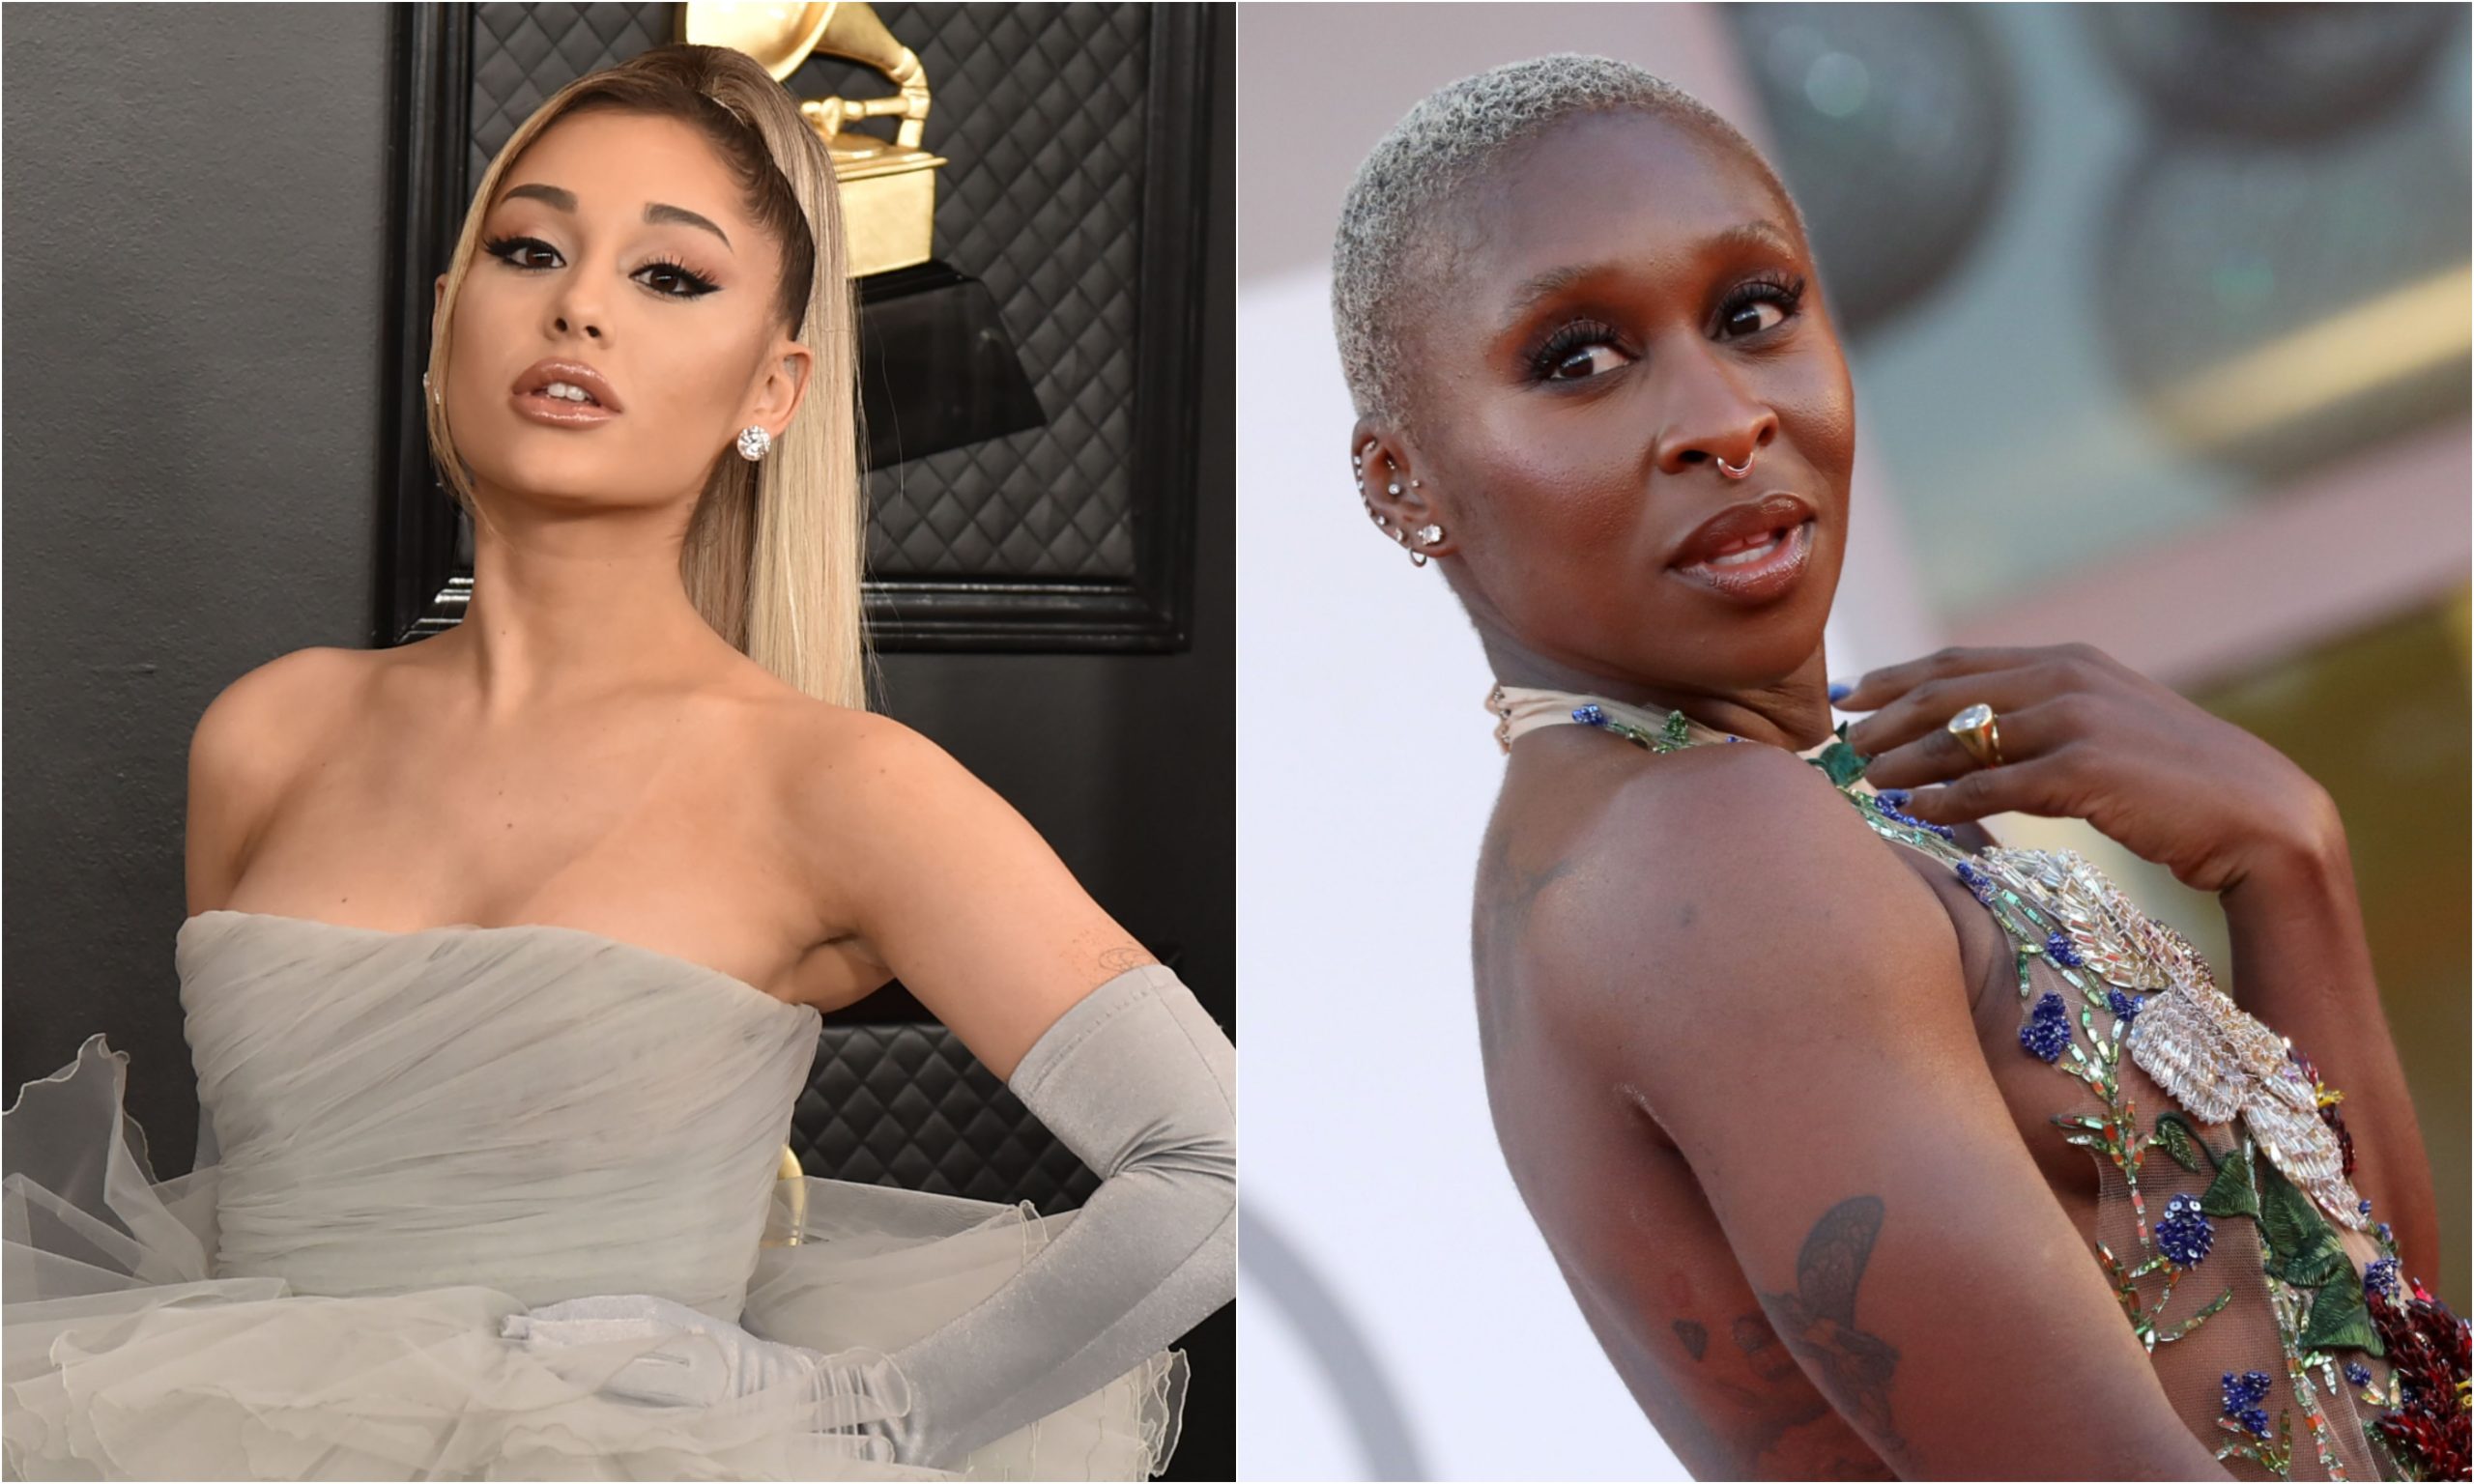 ‘Wicked’ Movie Cast: Cynthia Erivo and Ariana Grande’s Broadway History Gives Them a Unique Connection